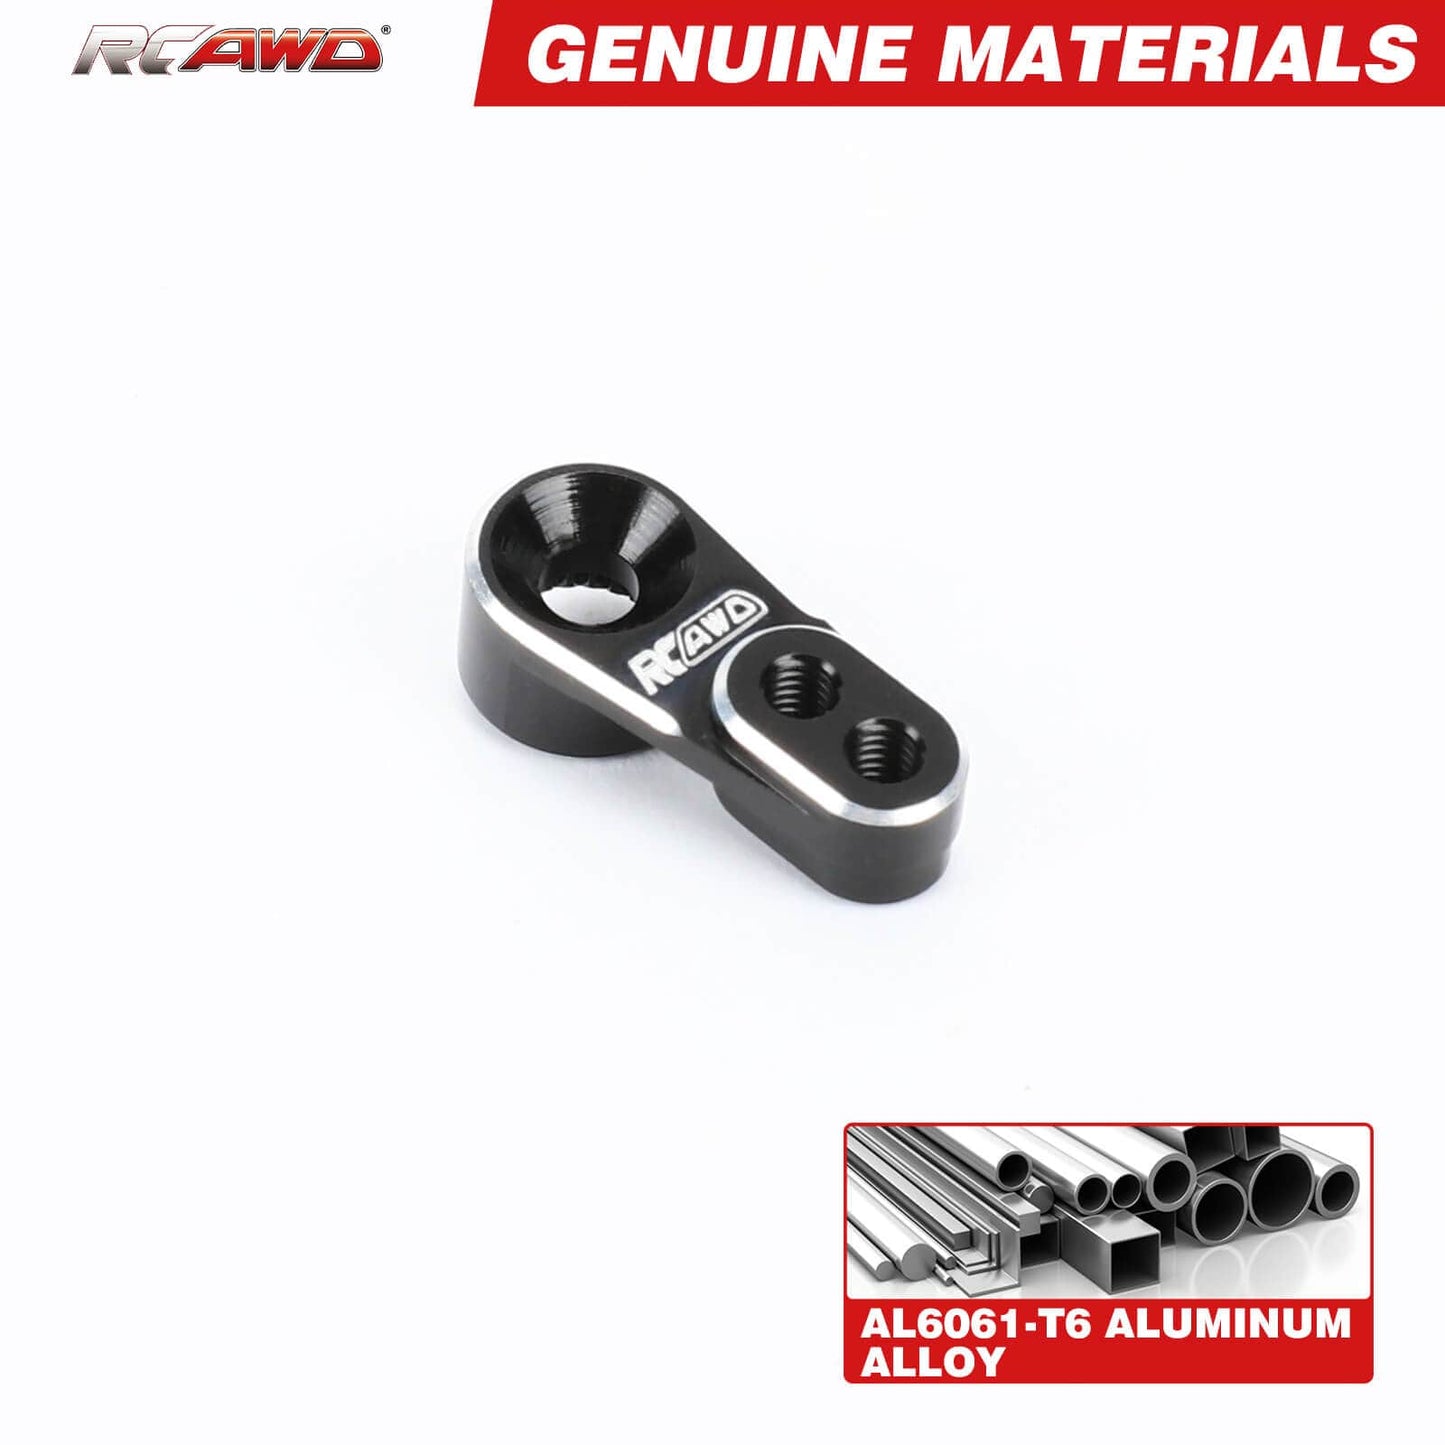 RCAWD Metal 25T Servo Horn for Trx4m Upgrades - RCAWD